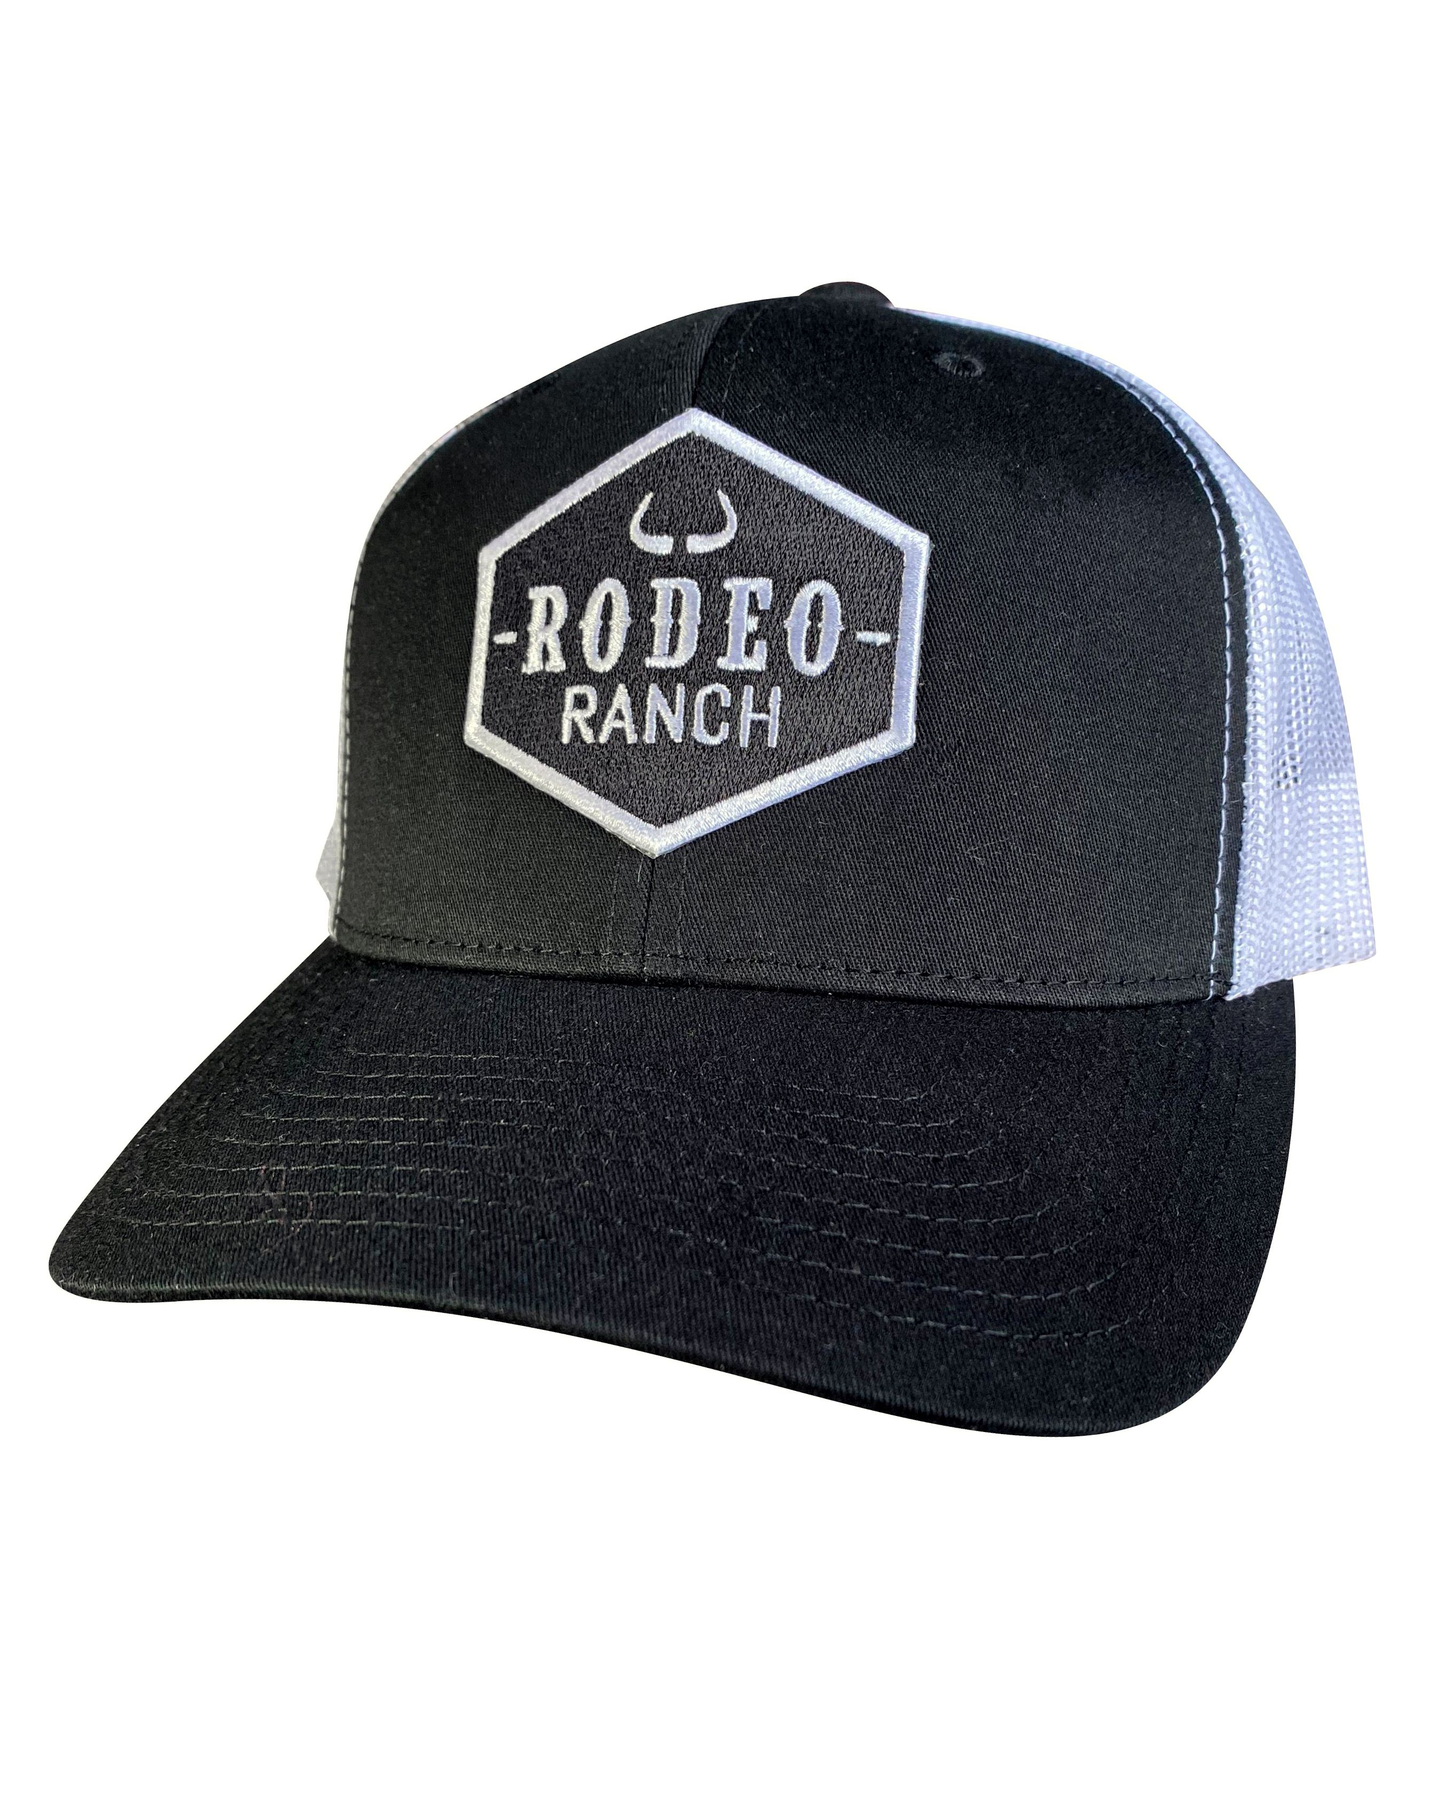 Rodeo Ranch Classic Logo Hat - Black and White